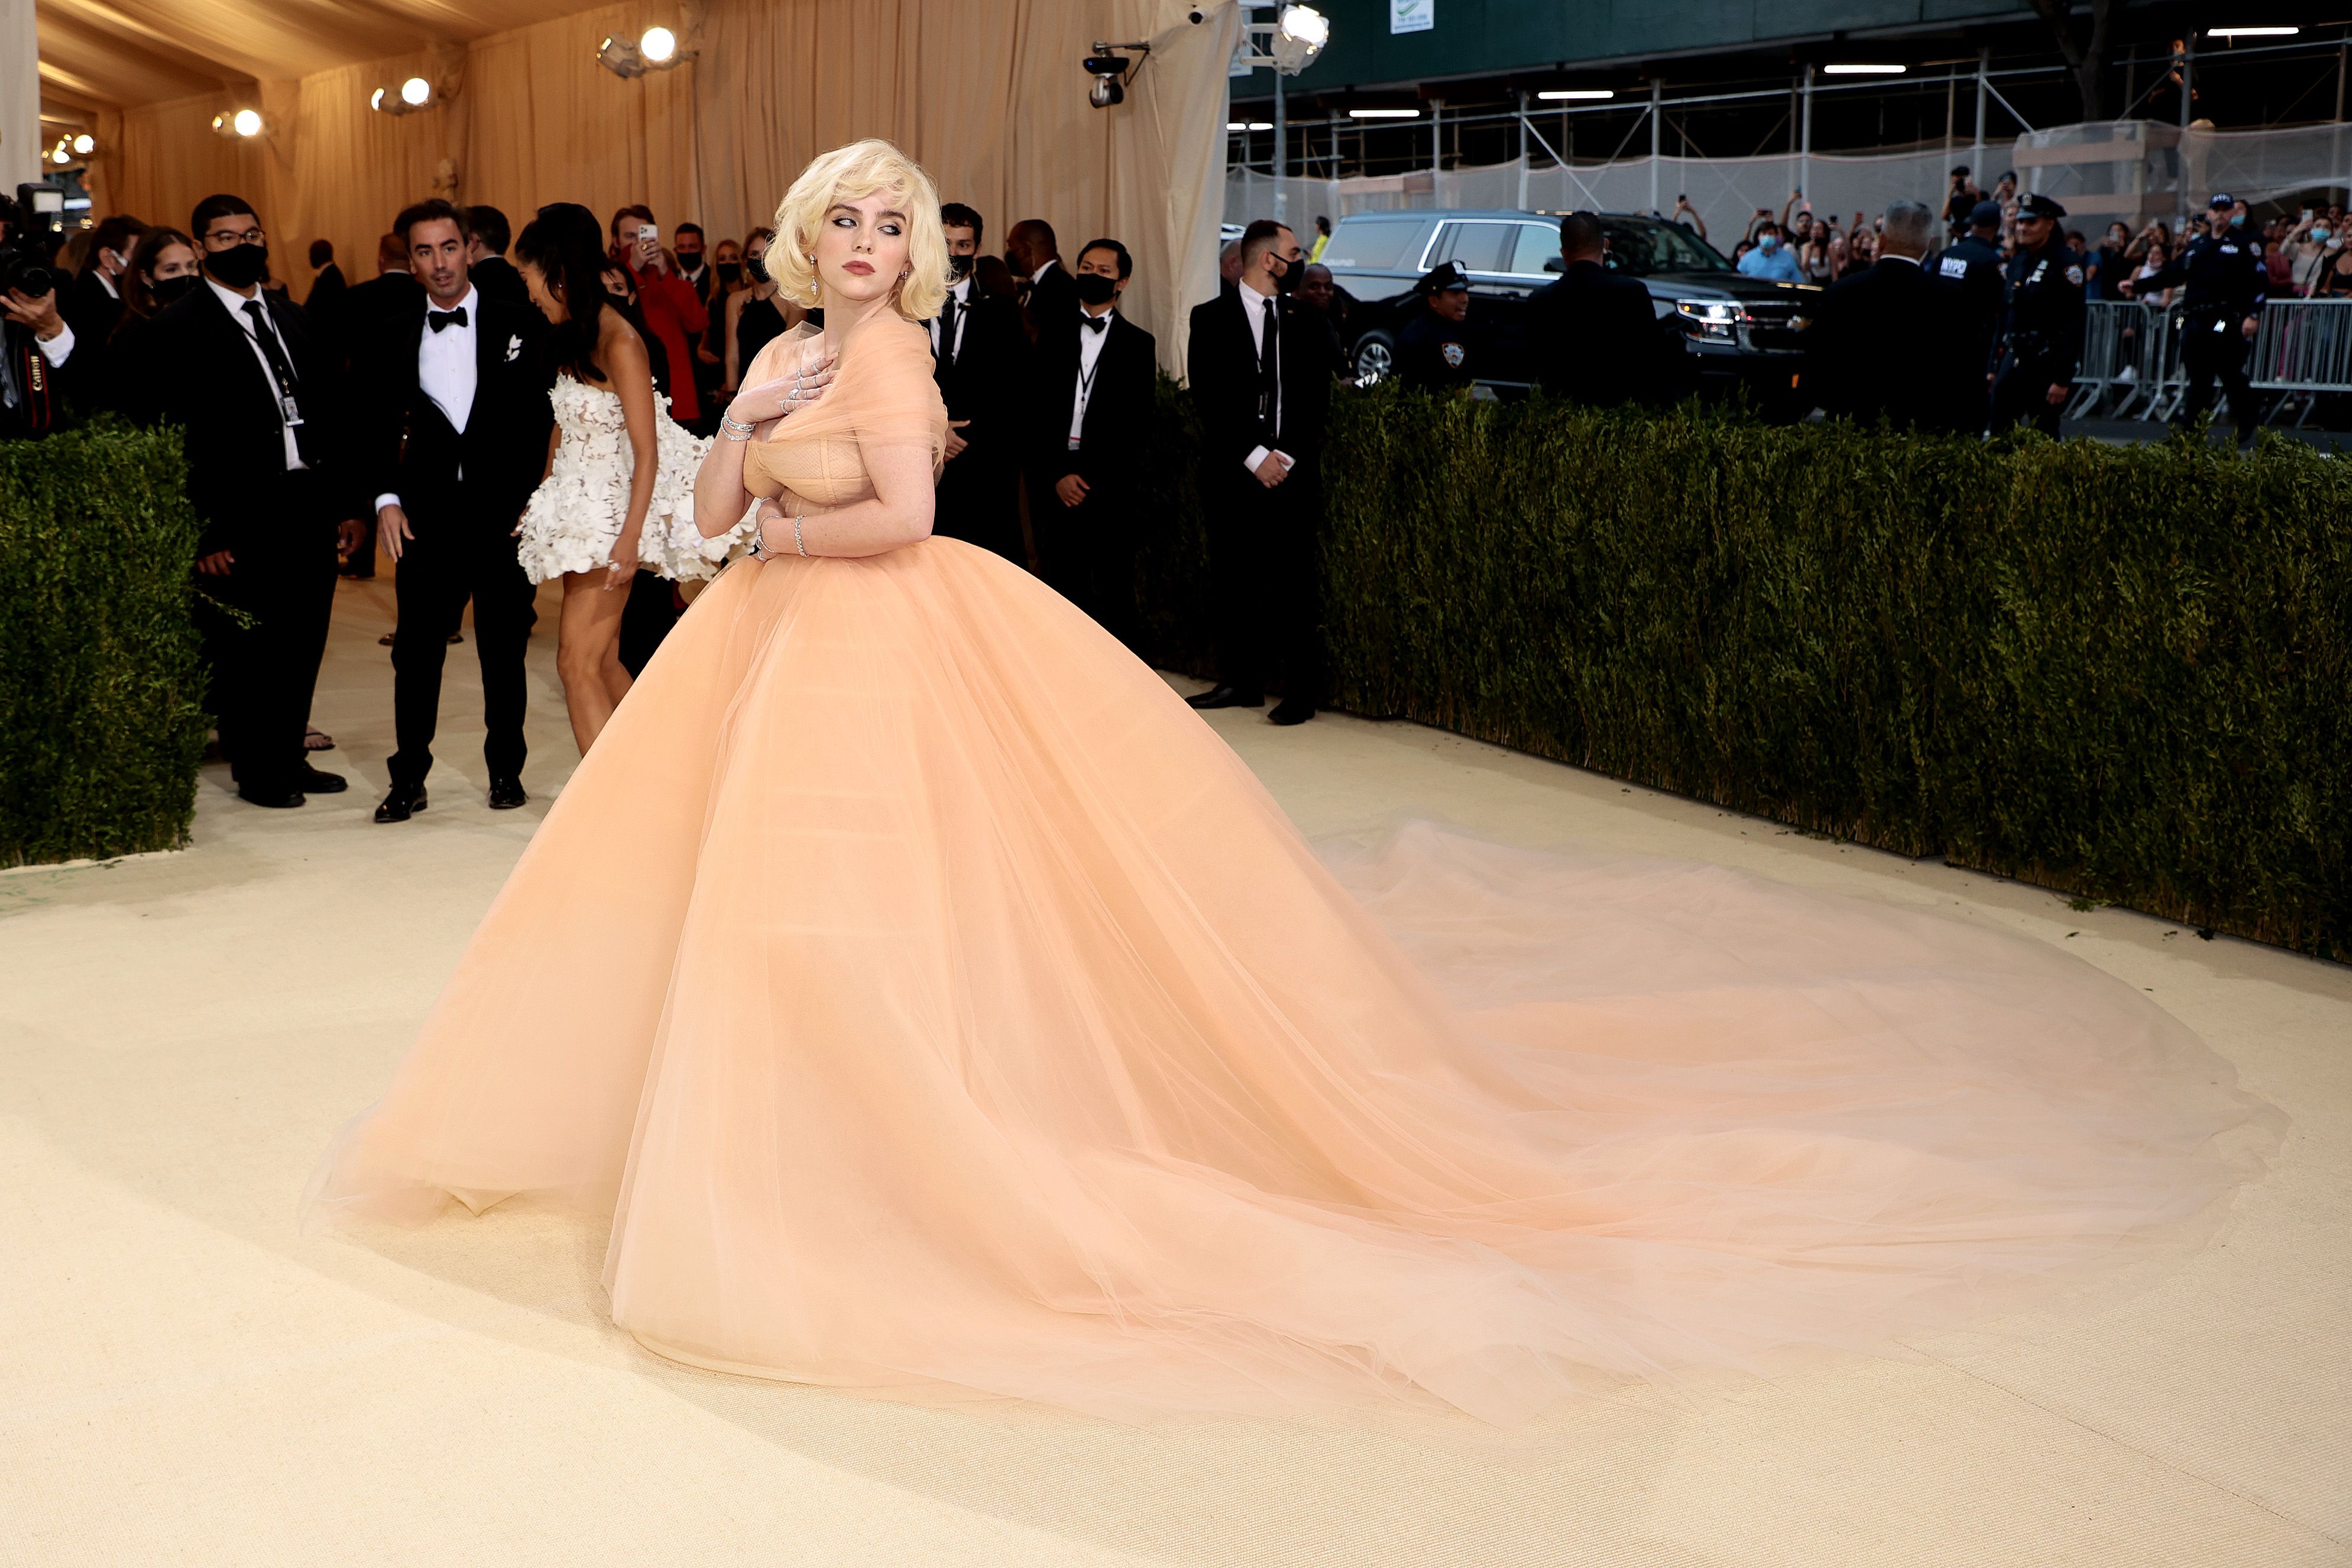 Met Gala 2022: Date, theme, celebrity attendees, what's lined up